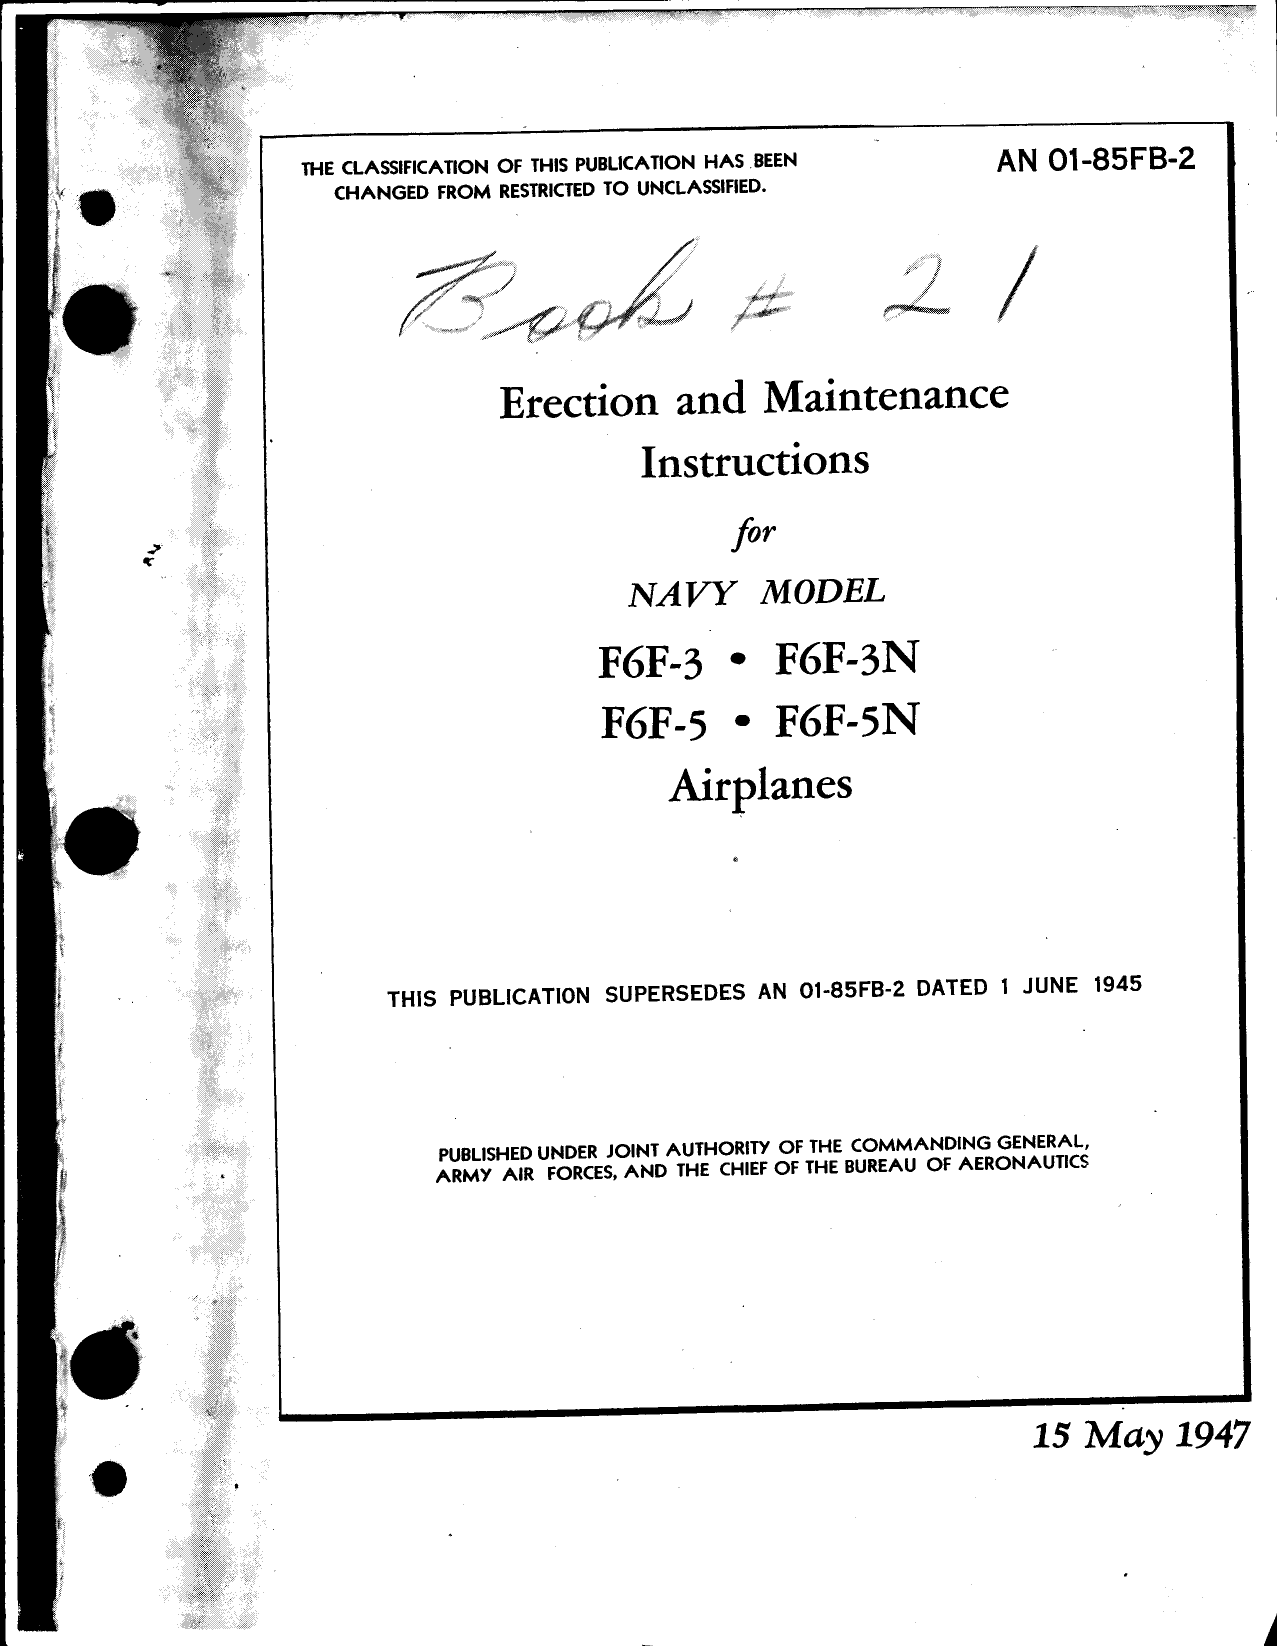 Sample page 1 from AirCorps Library document: Erection and Maintenance Instructions for F6F-3, -3N, -5 and -5N